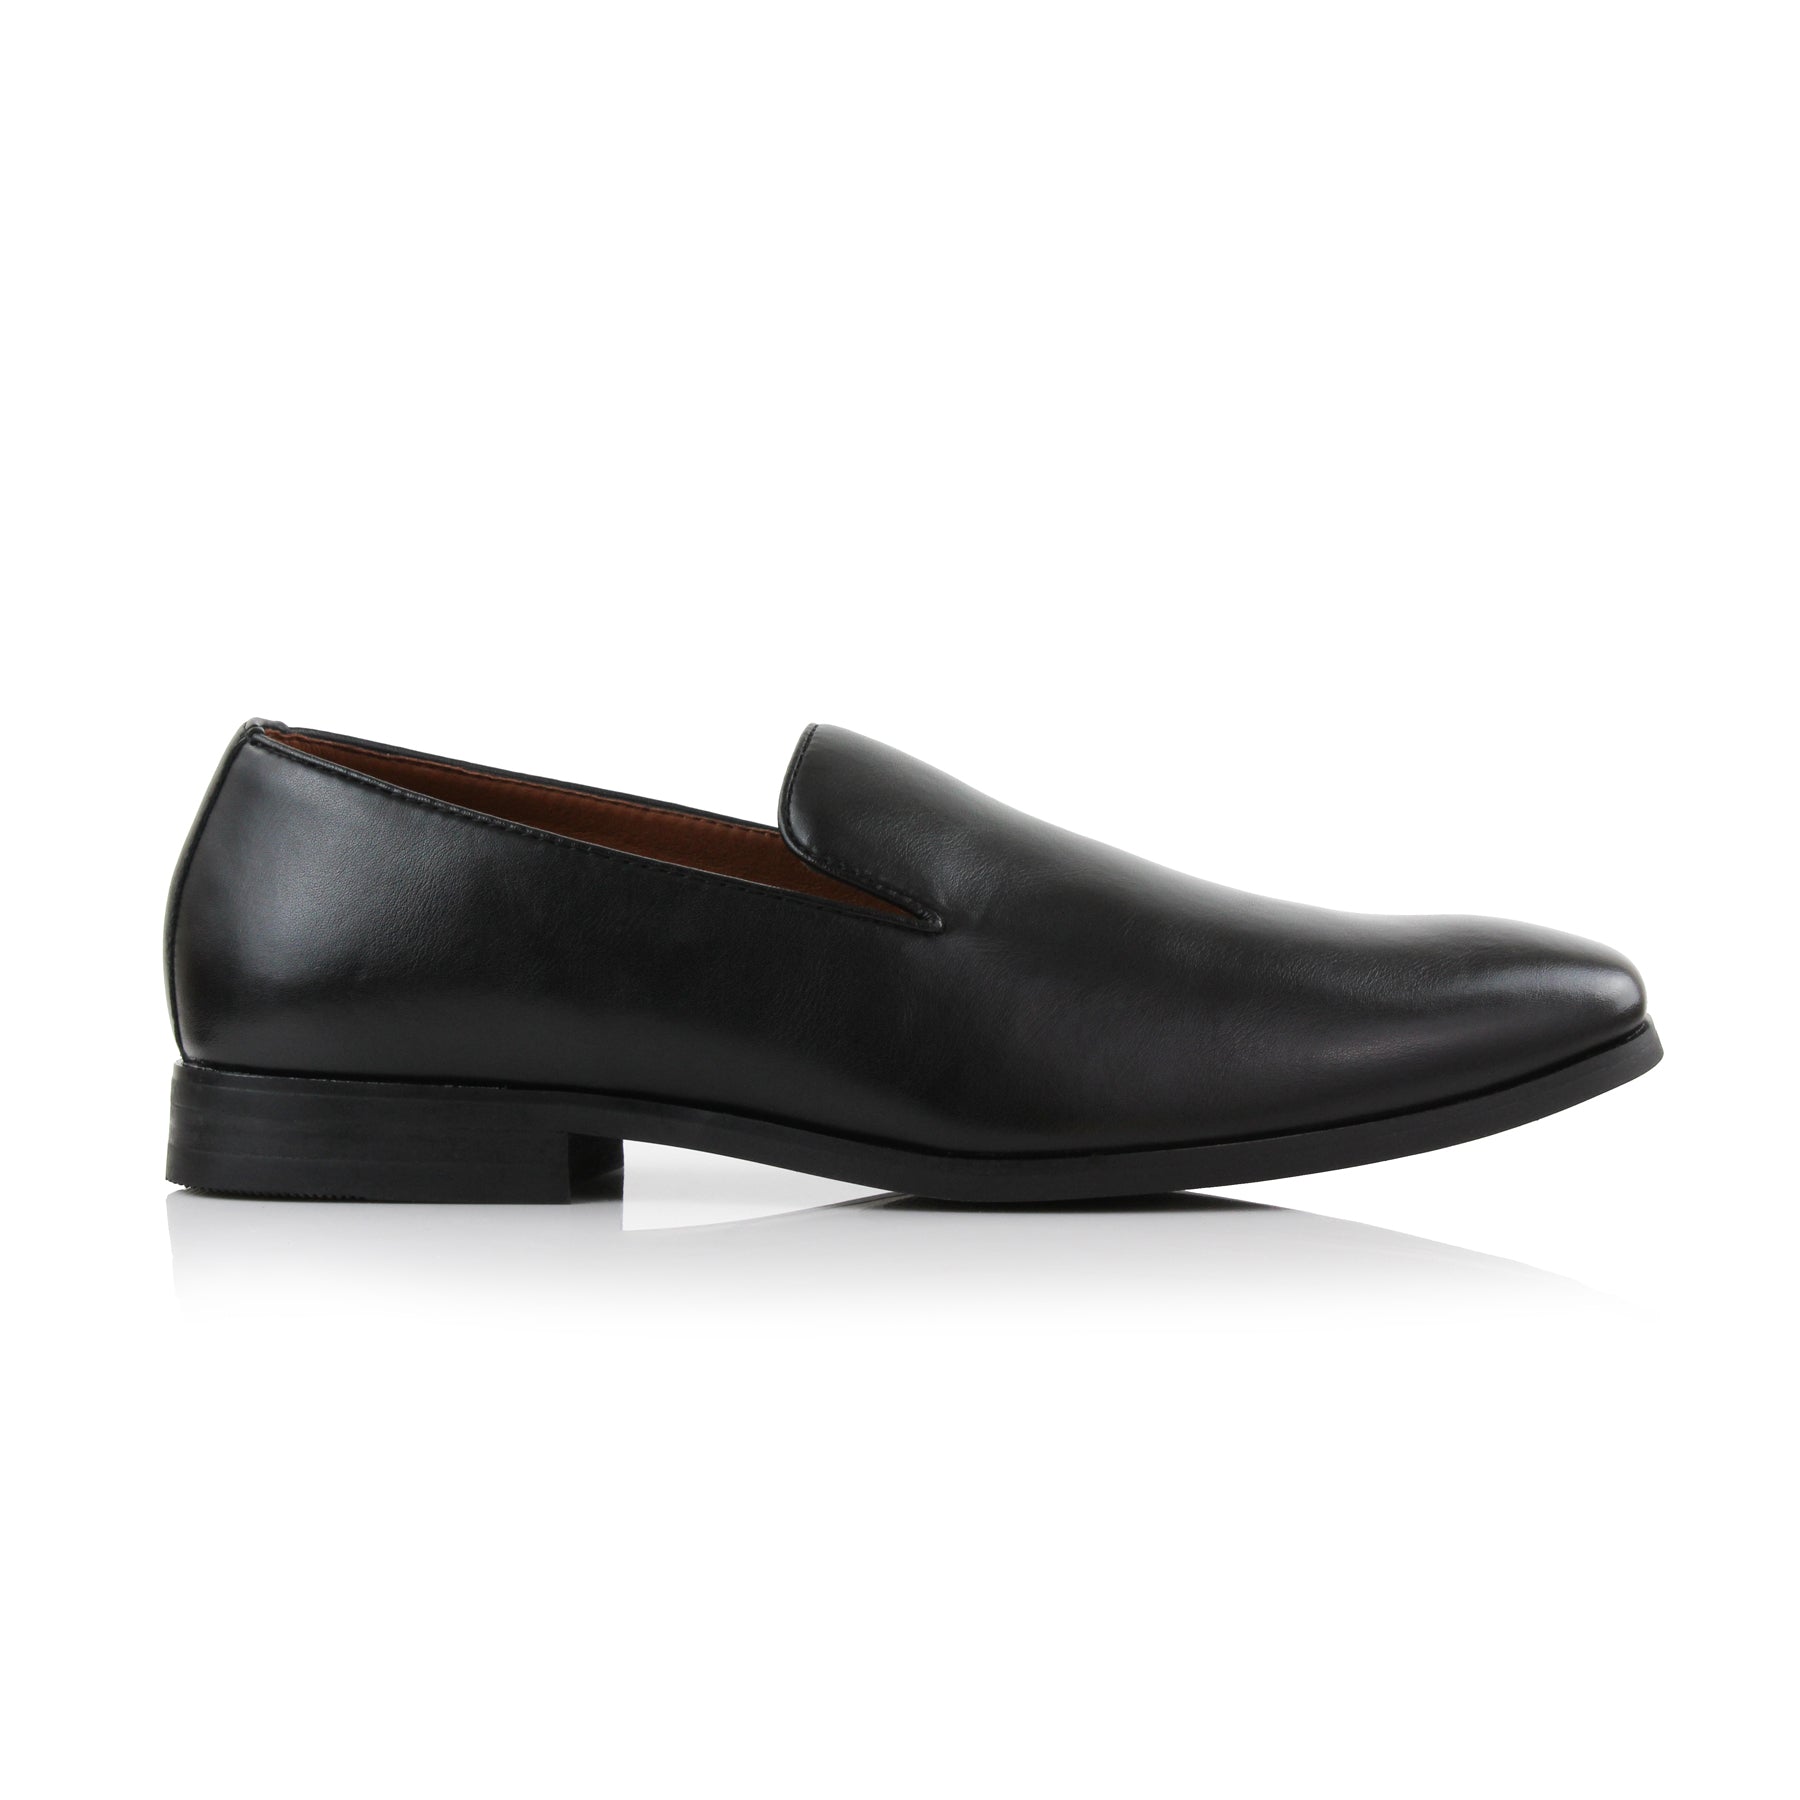 Wholecut Loafers | Clyde by Ferro Aldo | Conal Footwear | Outer Side Angle View